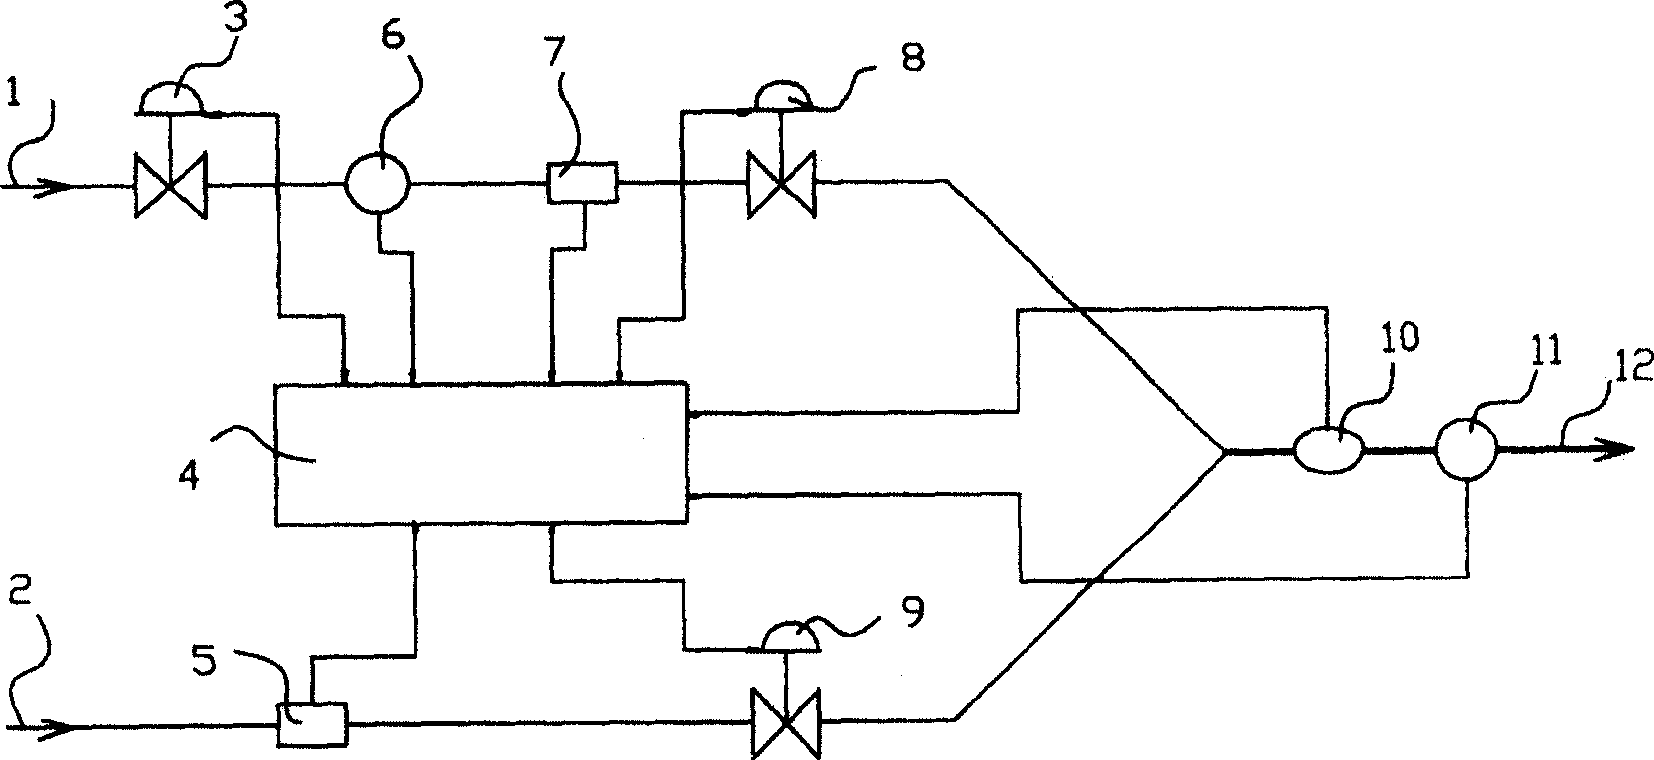 Heat value stabilizing control system of mixed gas and computer-controlled model